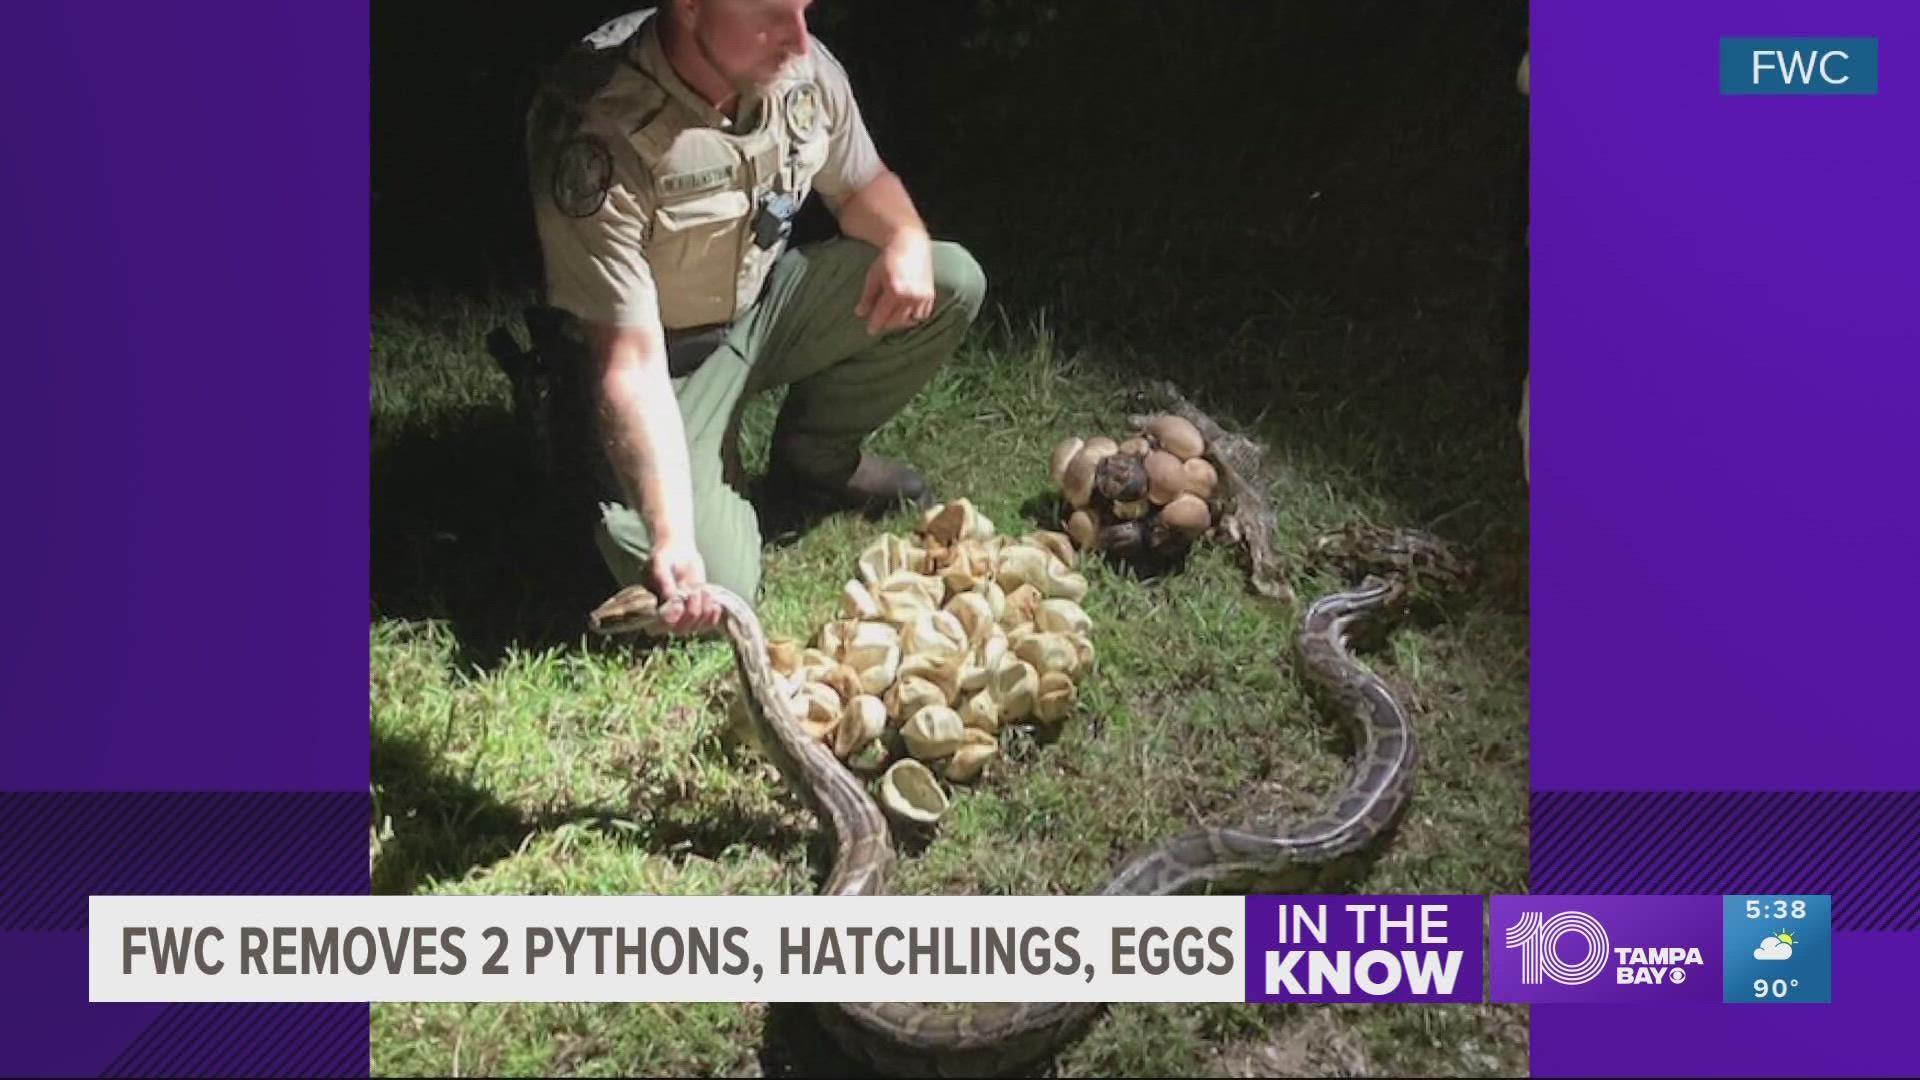 The FWC encourages people to remove and kill pythons from private lands whenever possible.